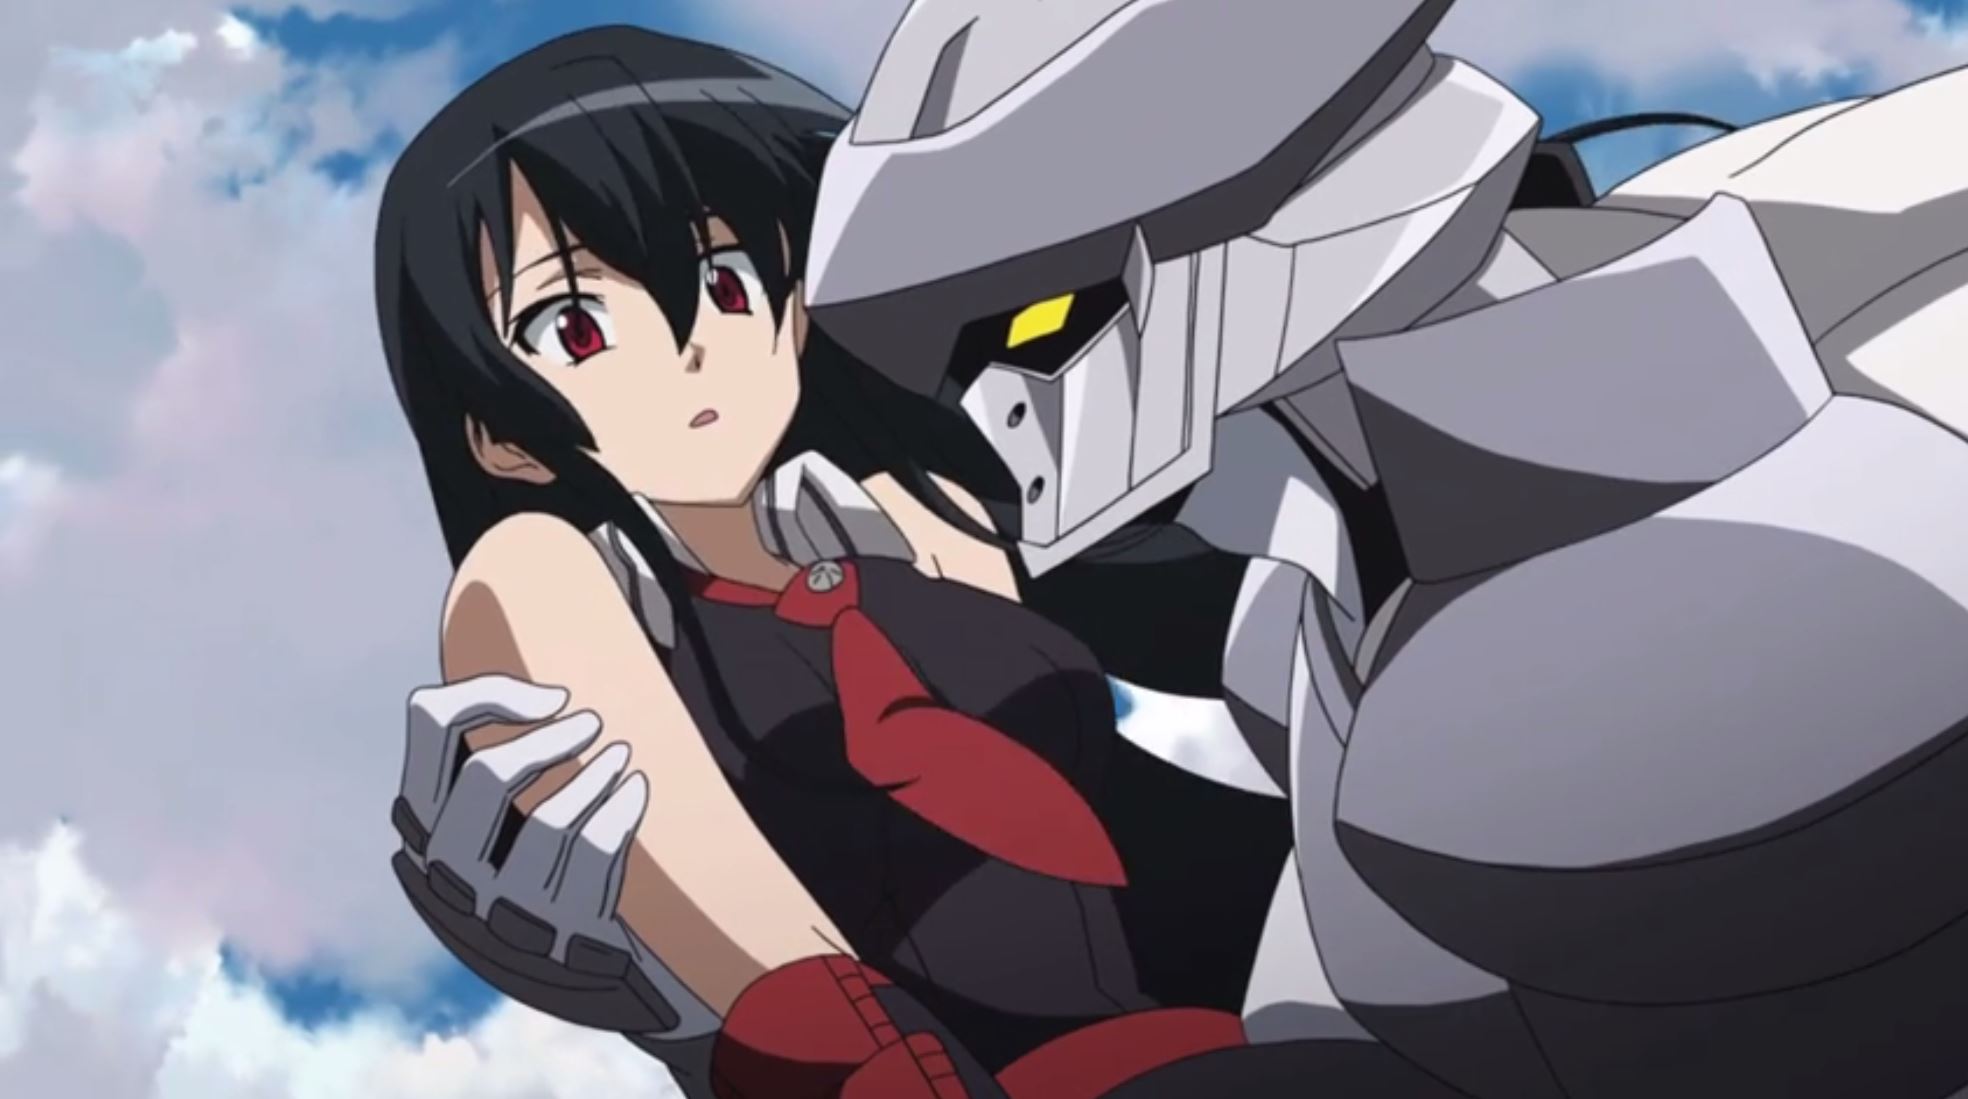 Don't worry Akame, Tatsumi's got your back. 😉 #AkameGaKill #Toon...